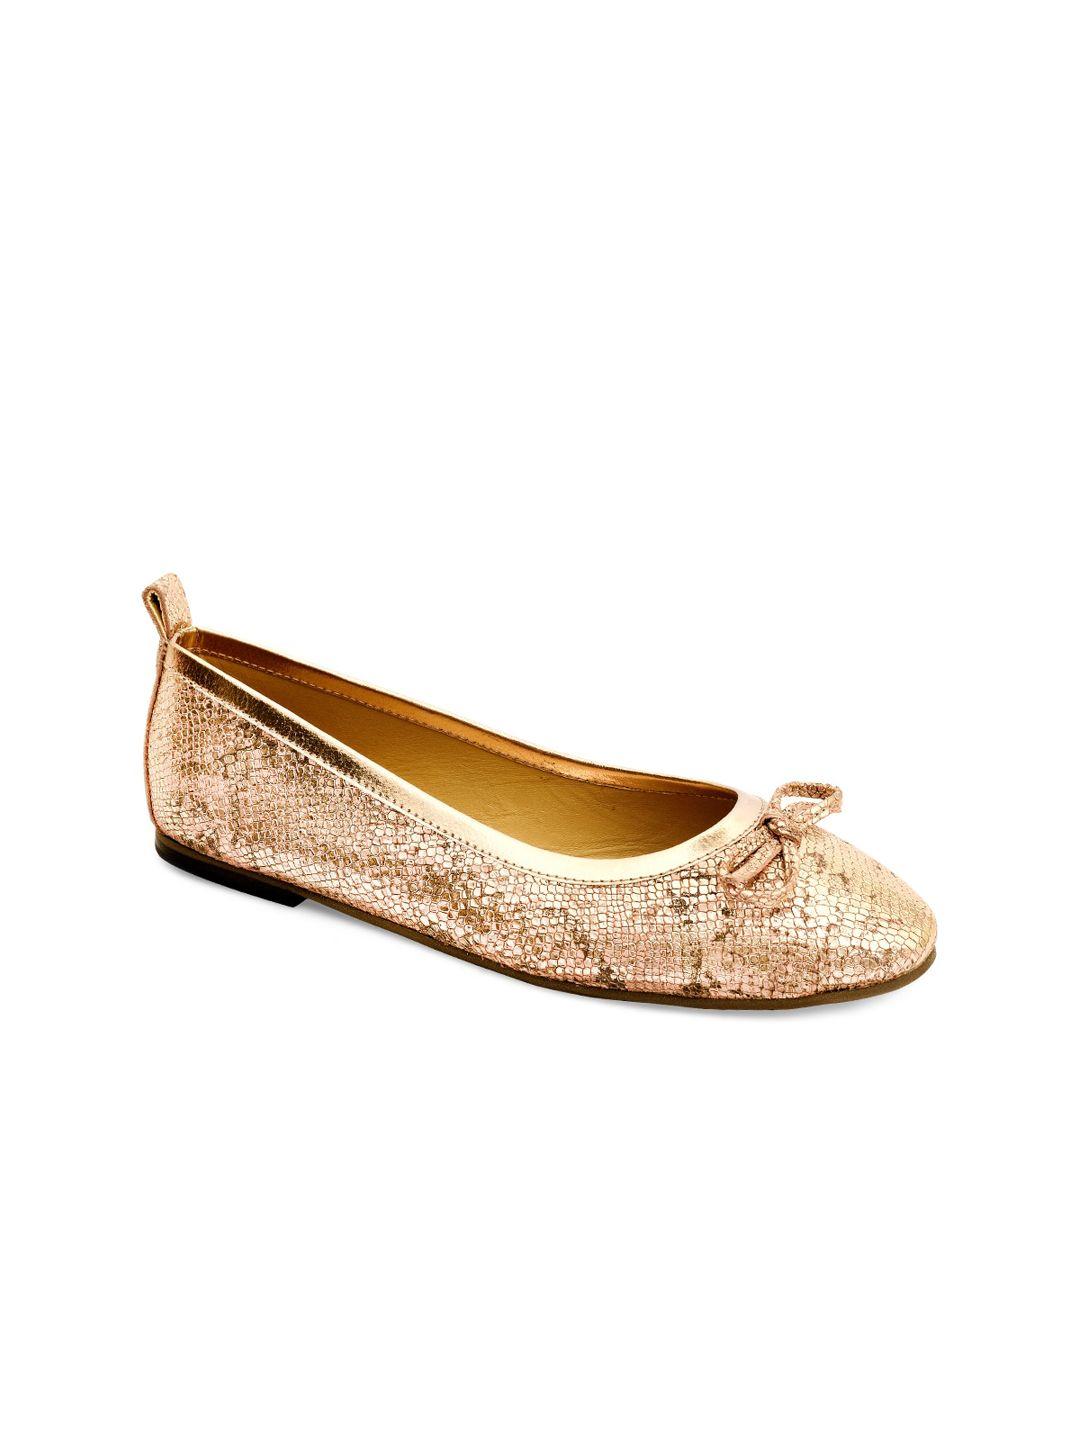 eske women gold-toned textured ballerinas with bows flats